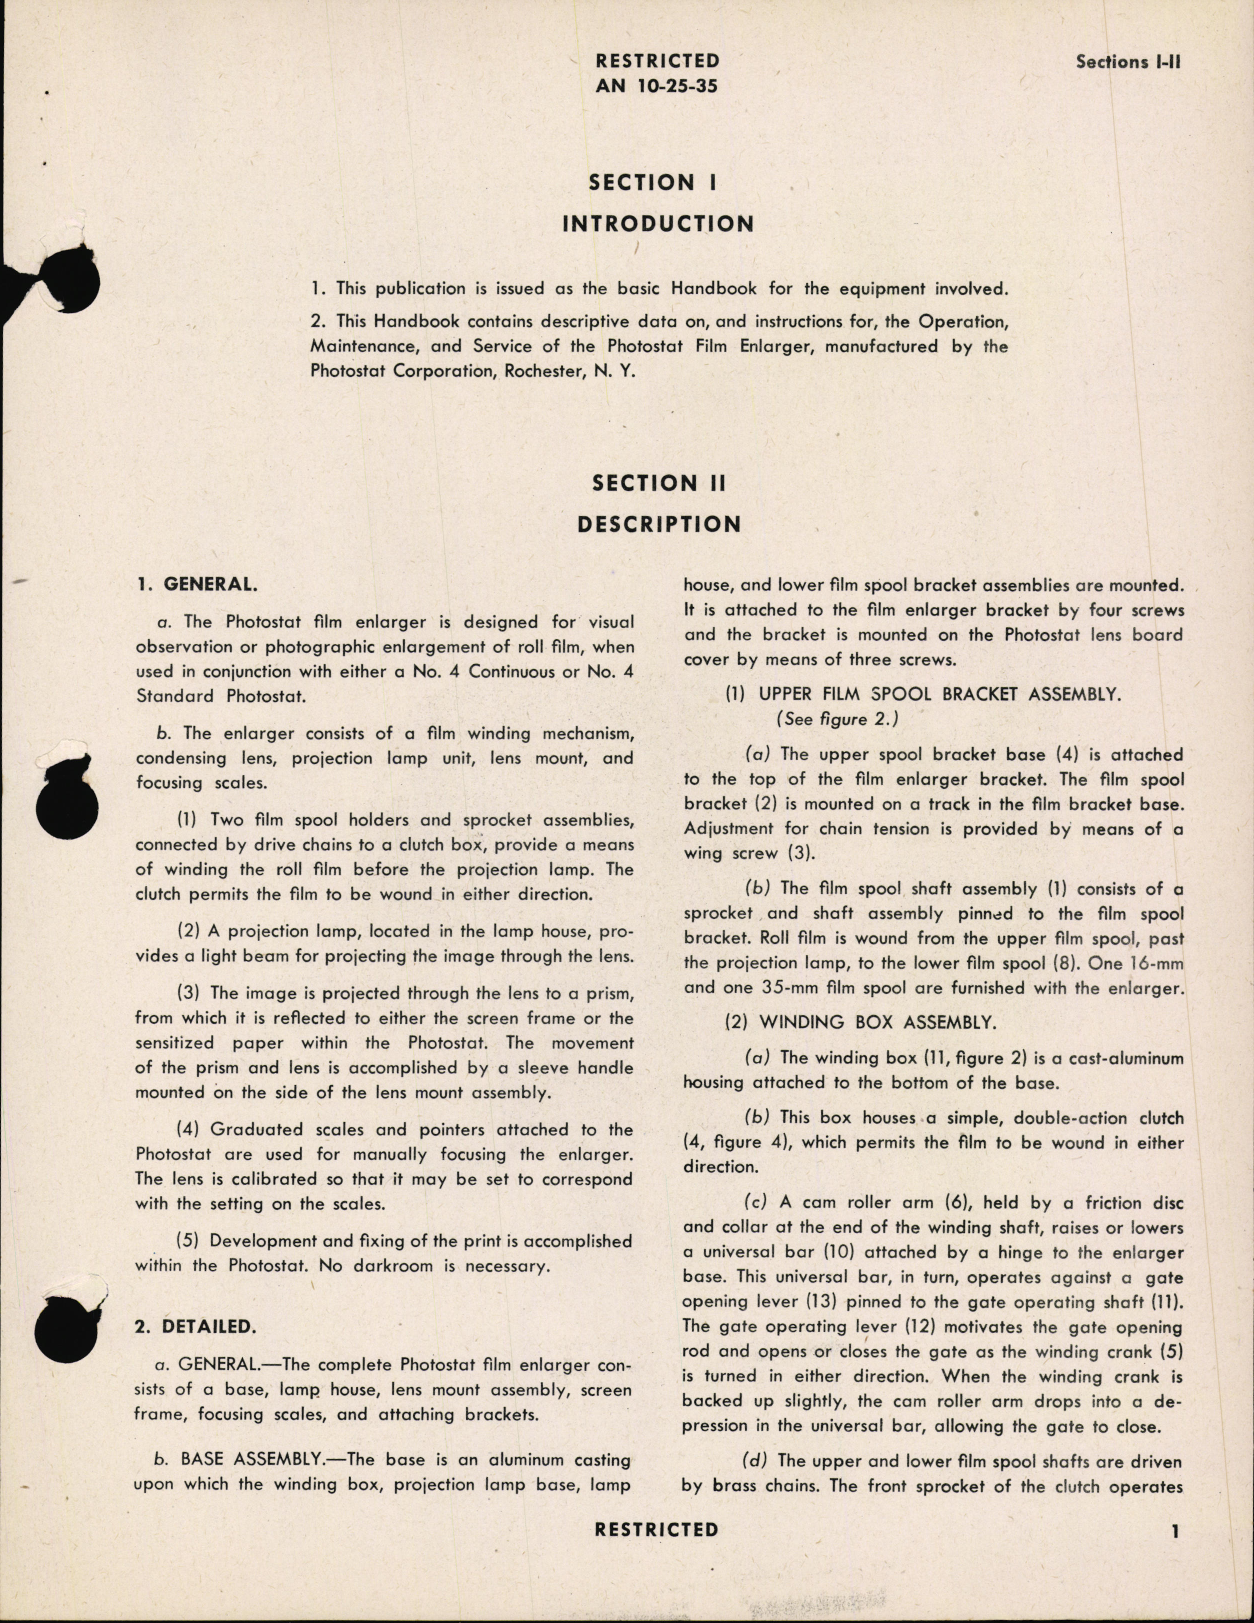 Sample page 5 from AirCorps Library document: Handbook of Instructions with Parts Catalog for Photostat Film Enlarger